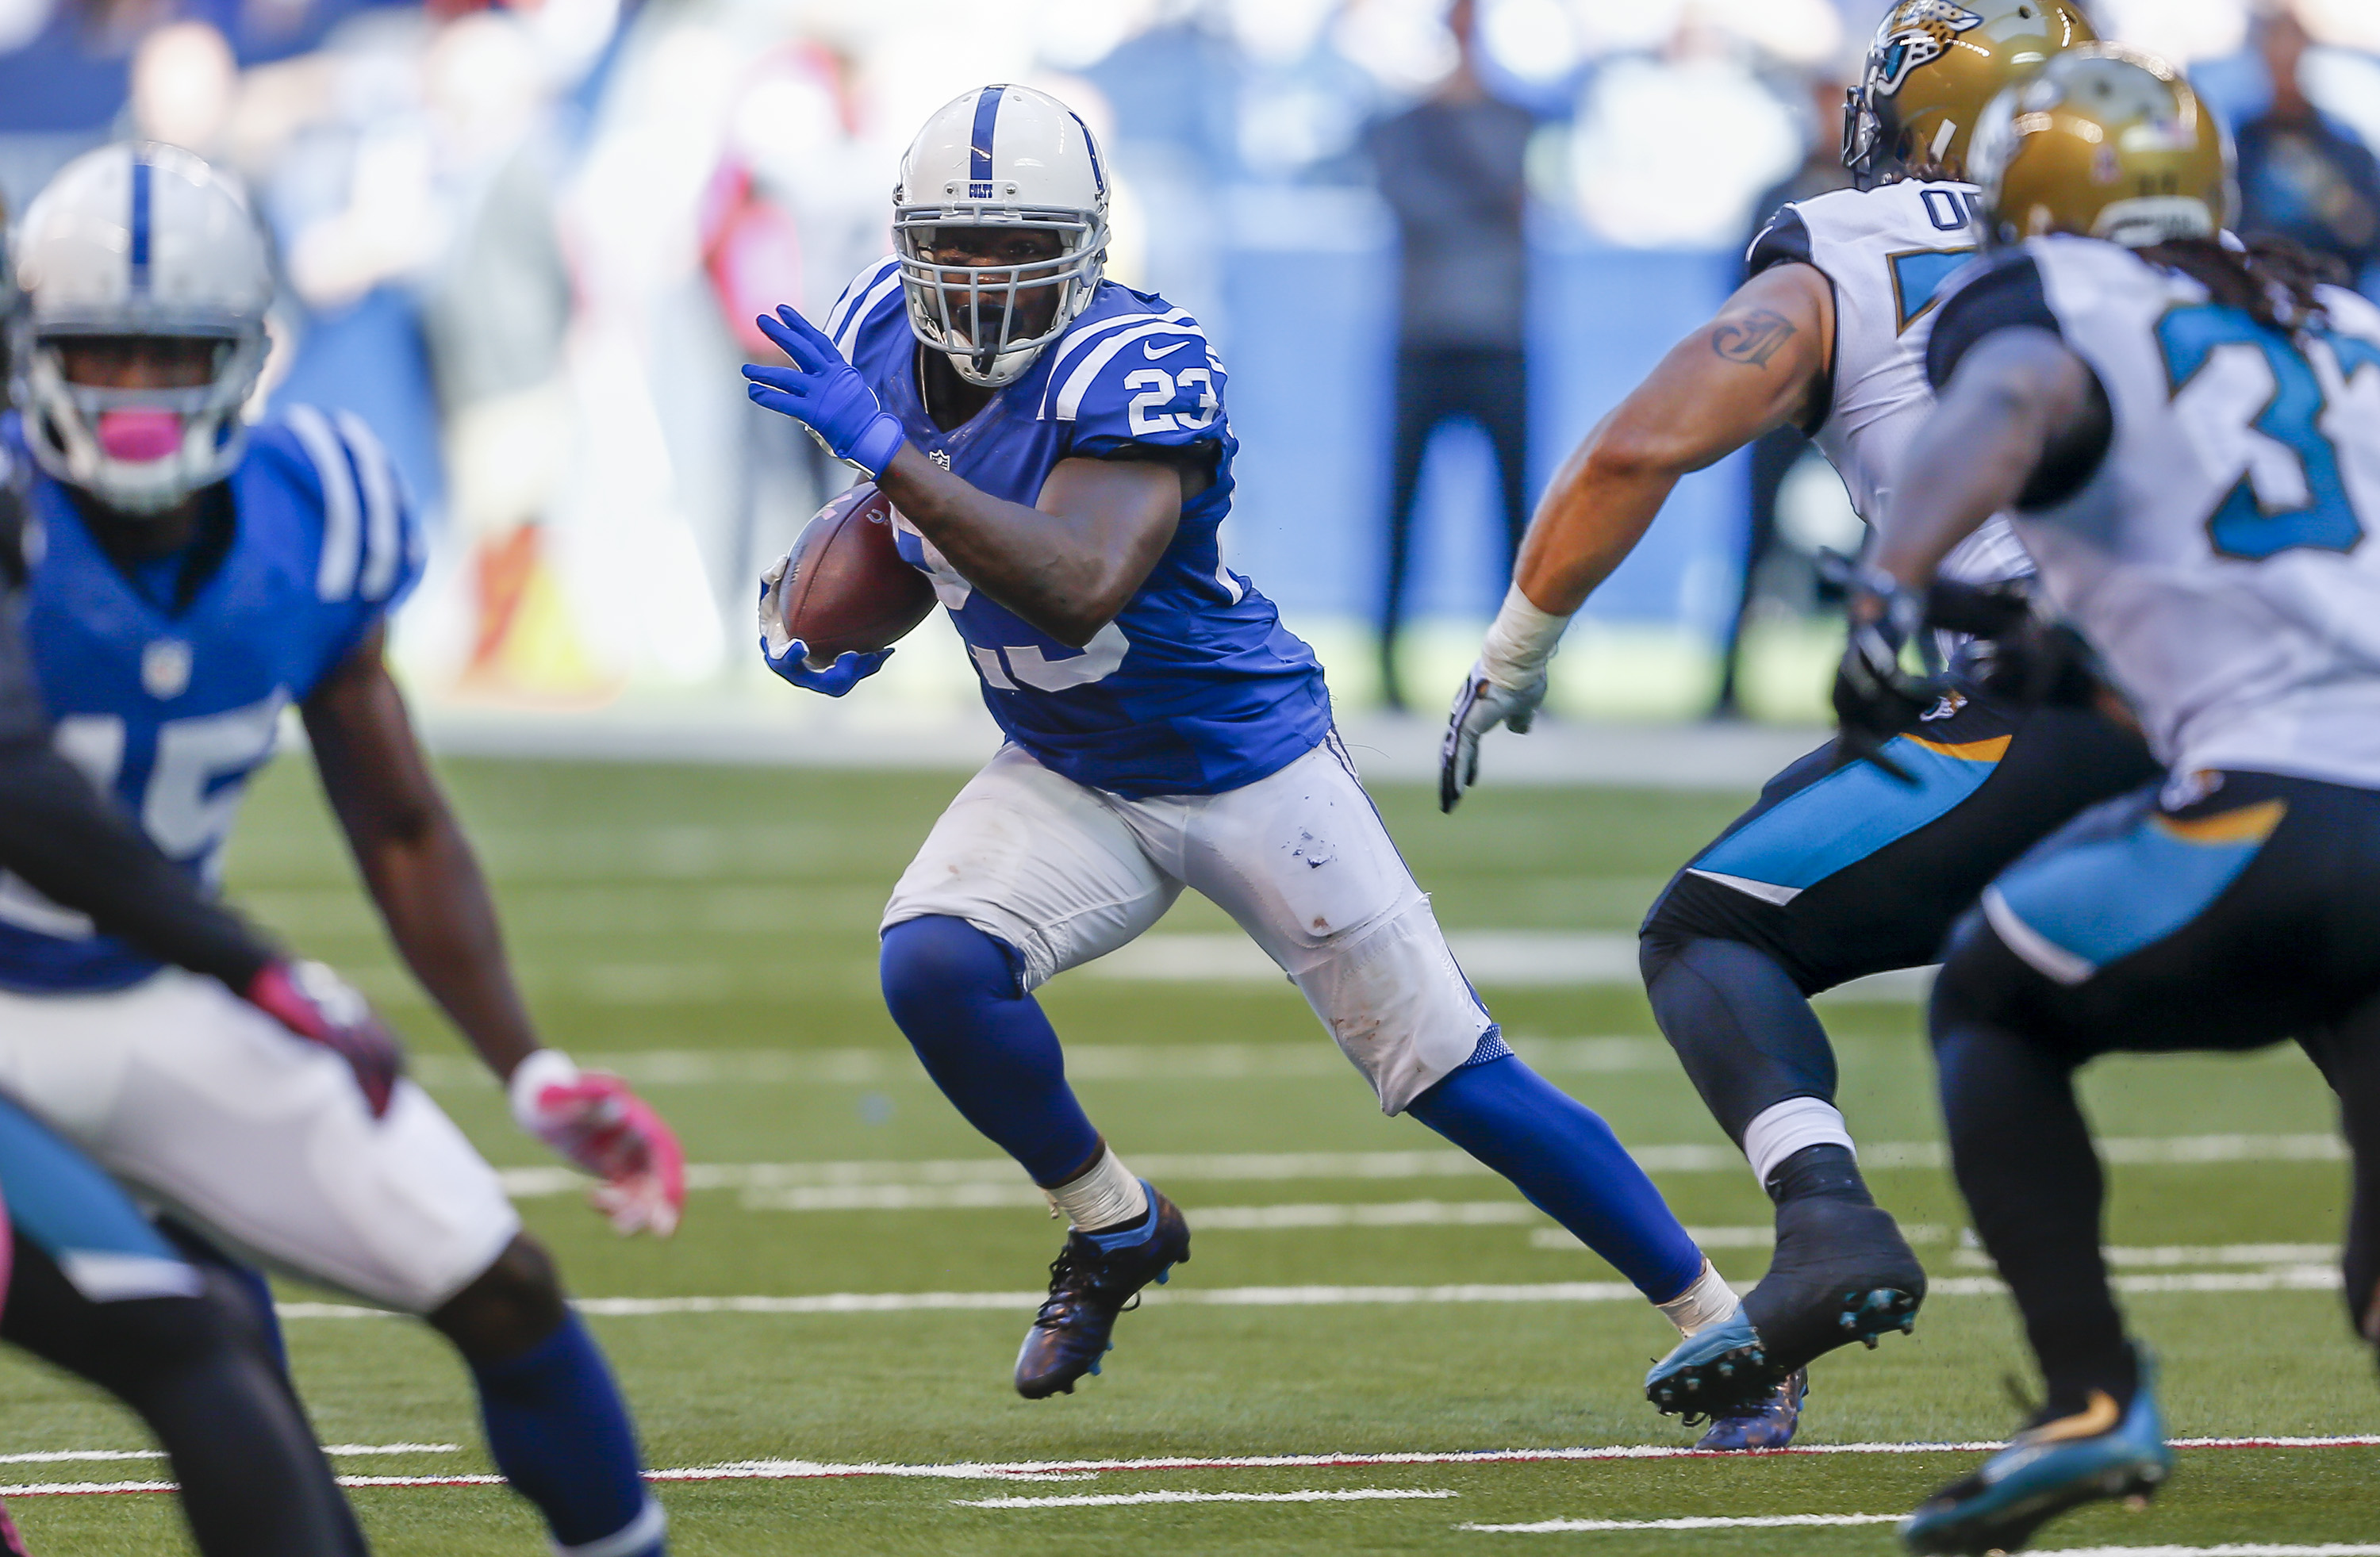 Amid QB changes, Frank Gore has been a huge addition to the Colts. (Getty)